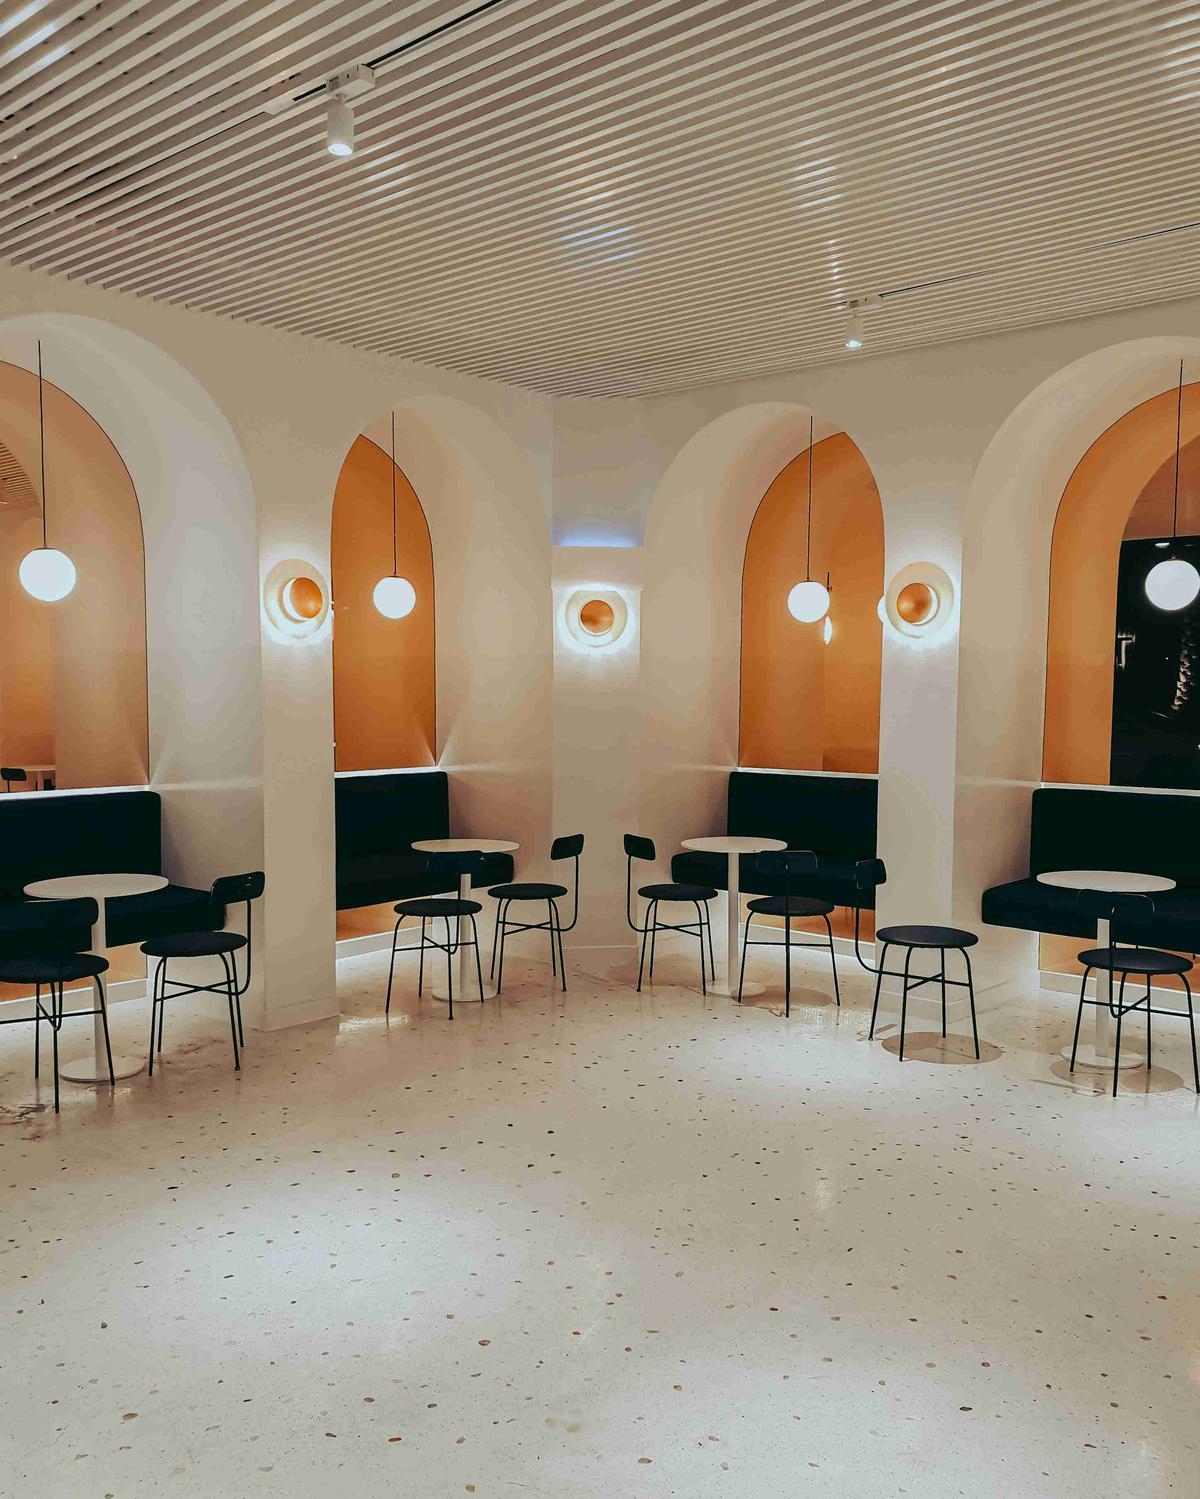 Modern Cafe Interior with Arched Walls and Spherical Lights